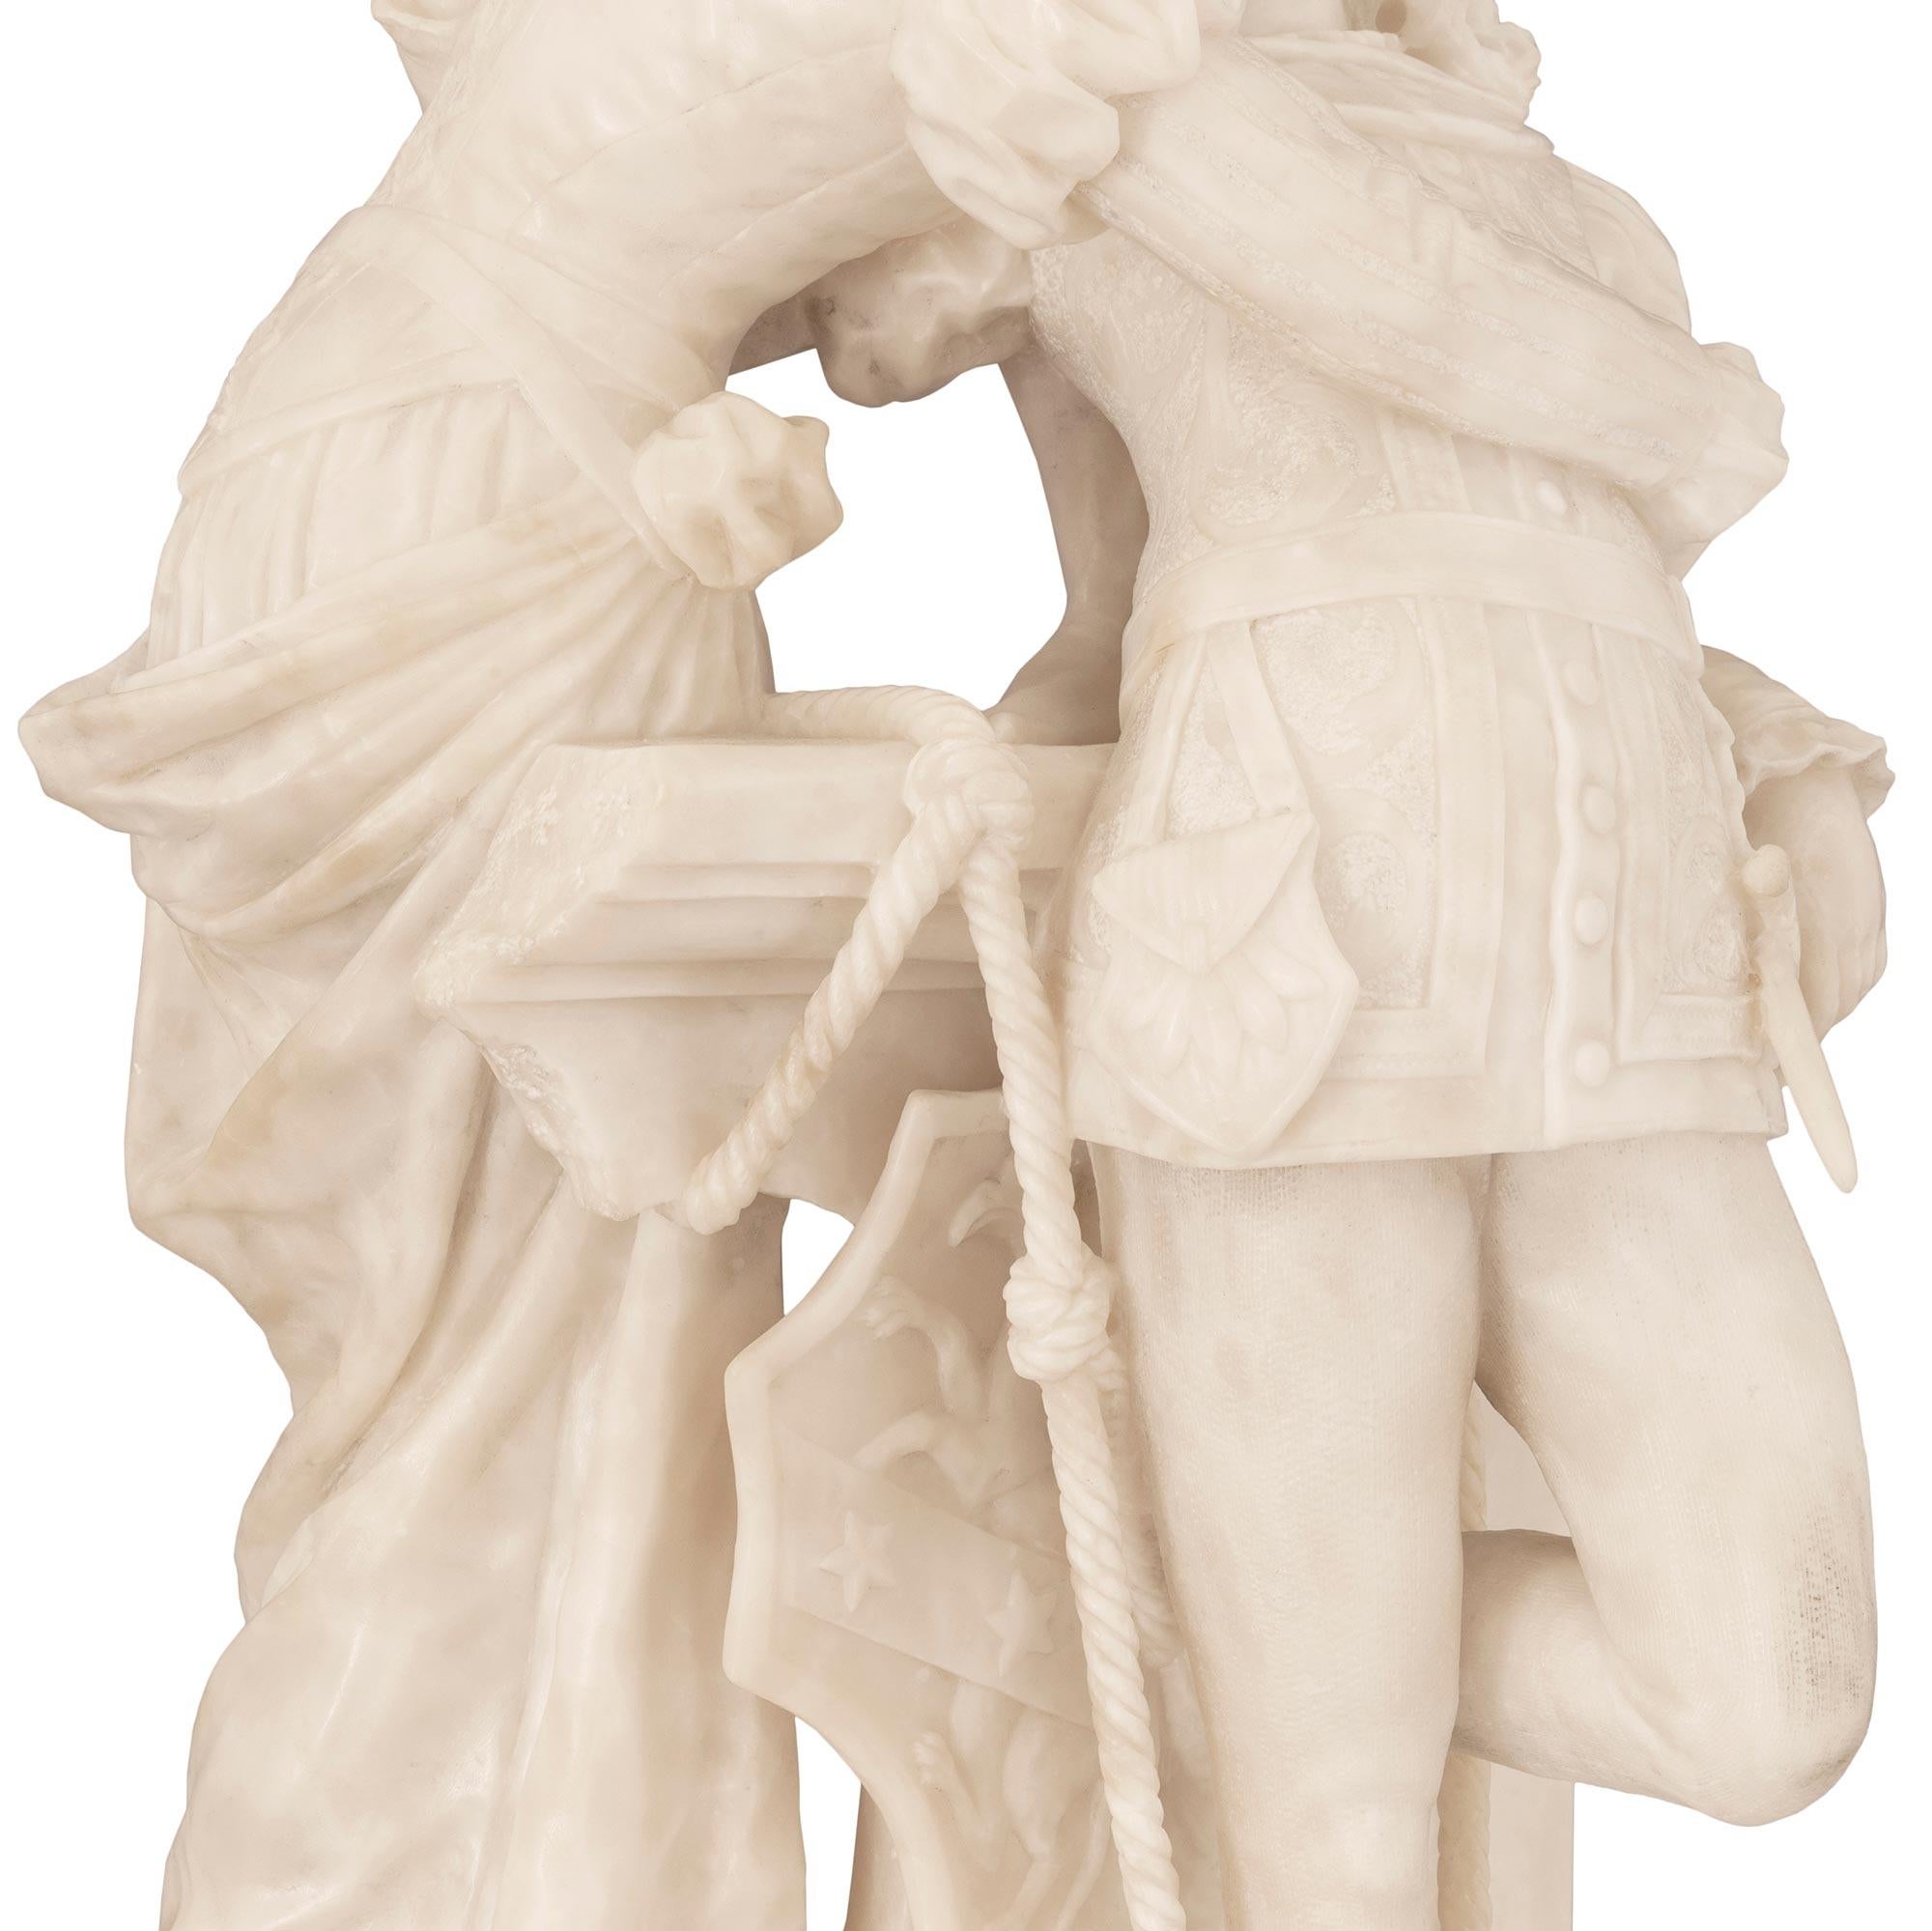 Italian 19th Century Alabaster Statue of Romeo And Juliet Signed F. Vichi For Sale 5